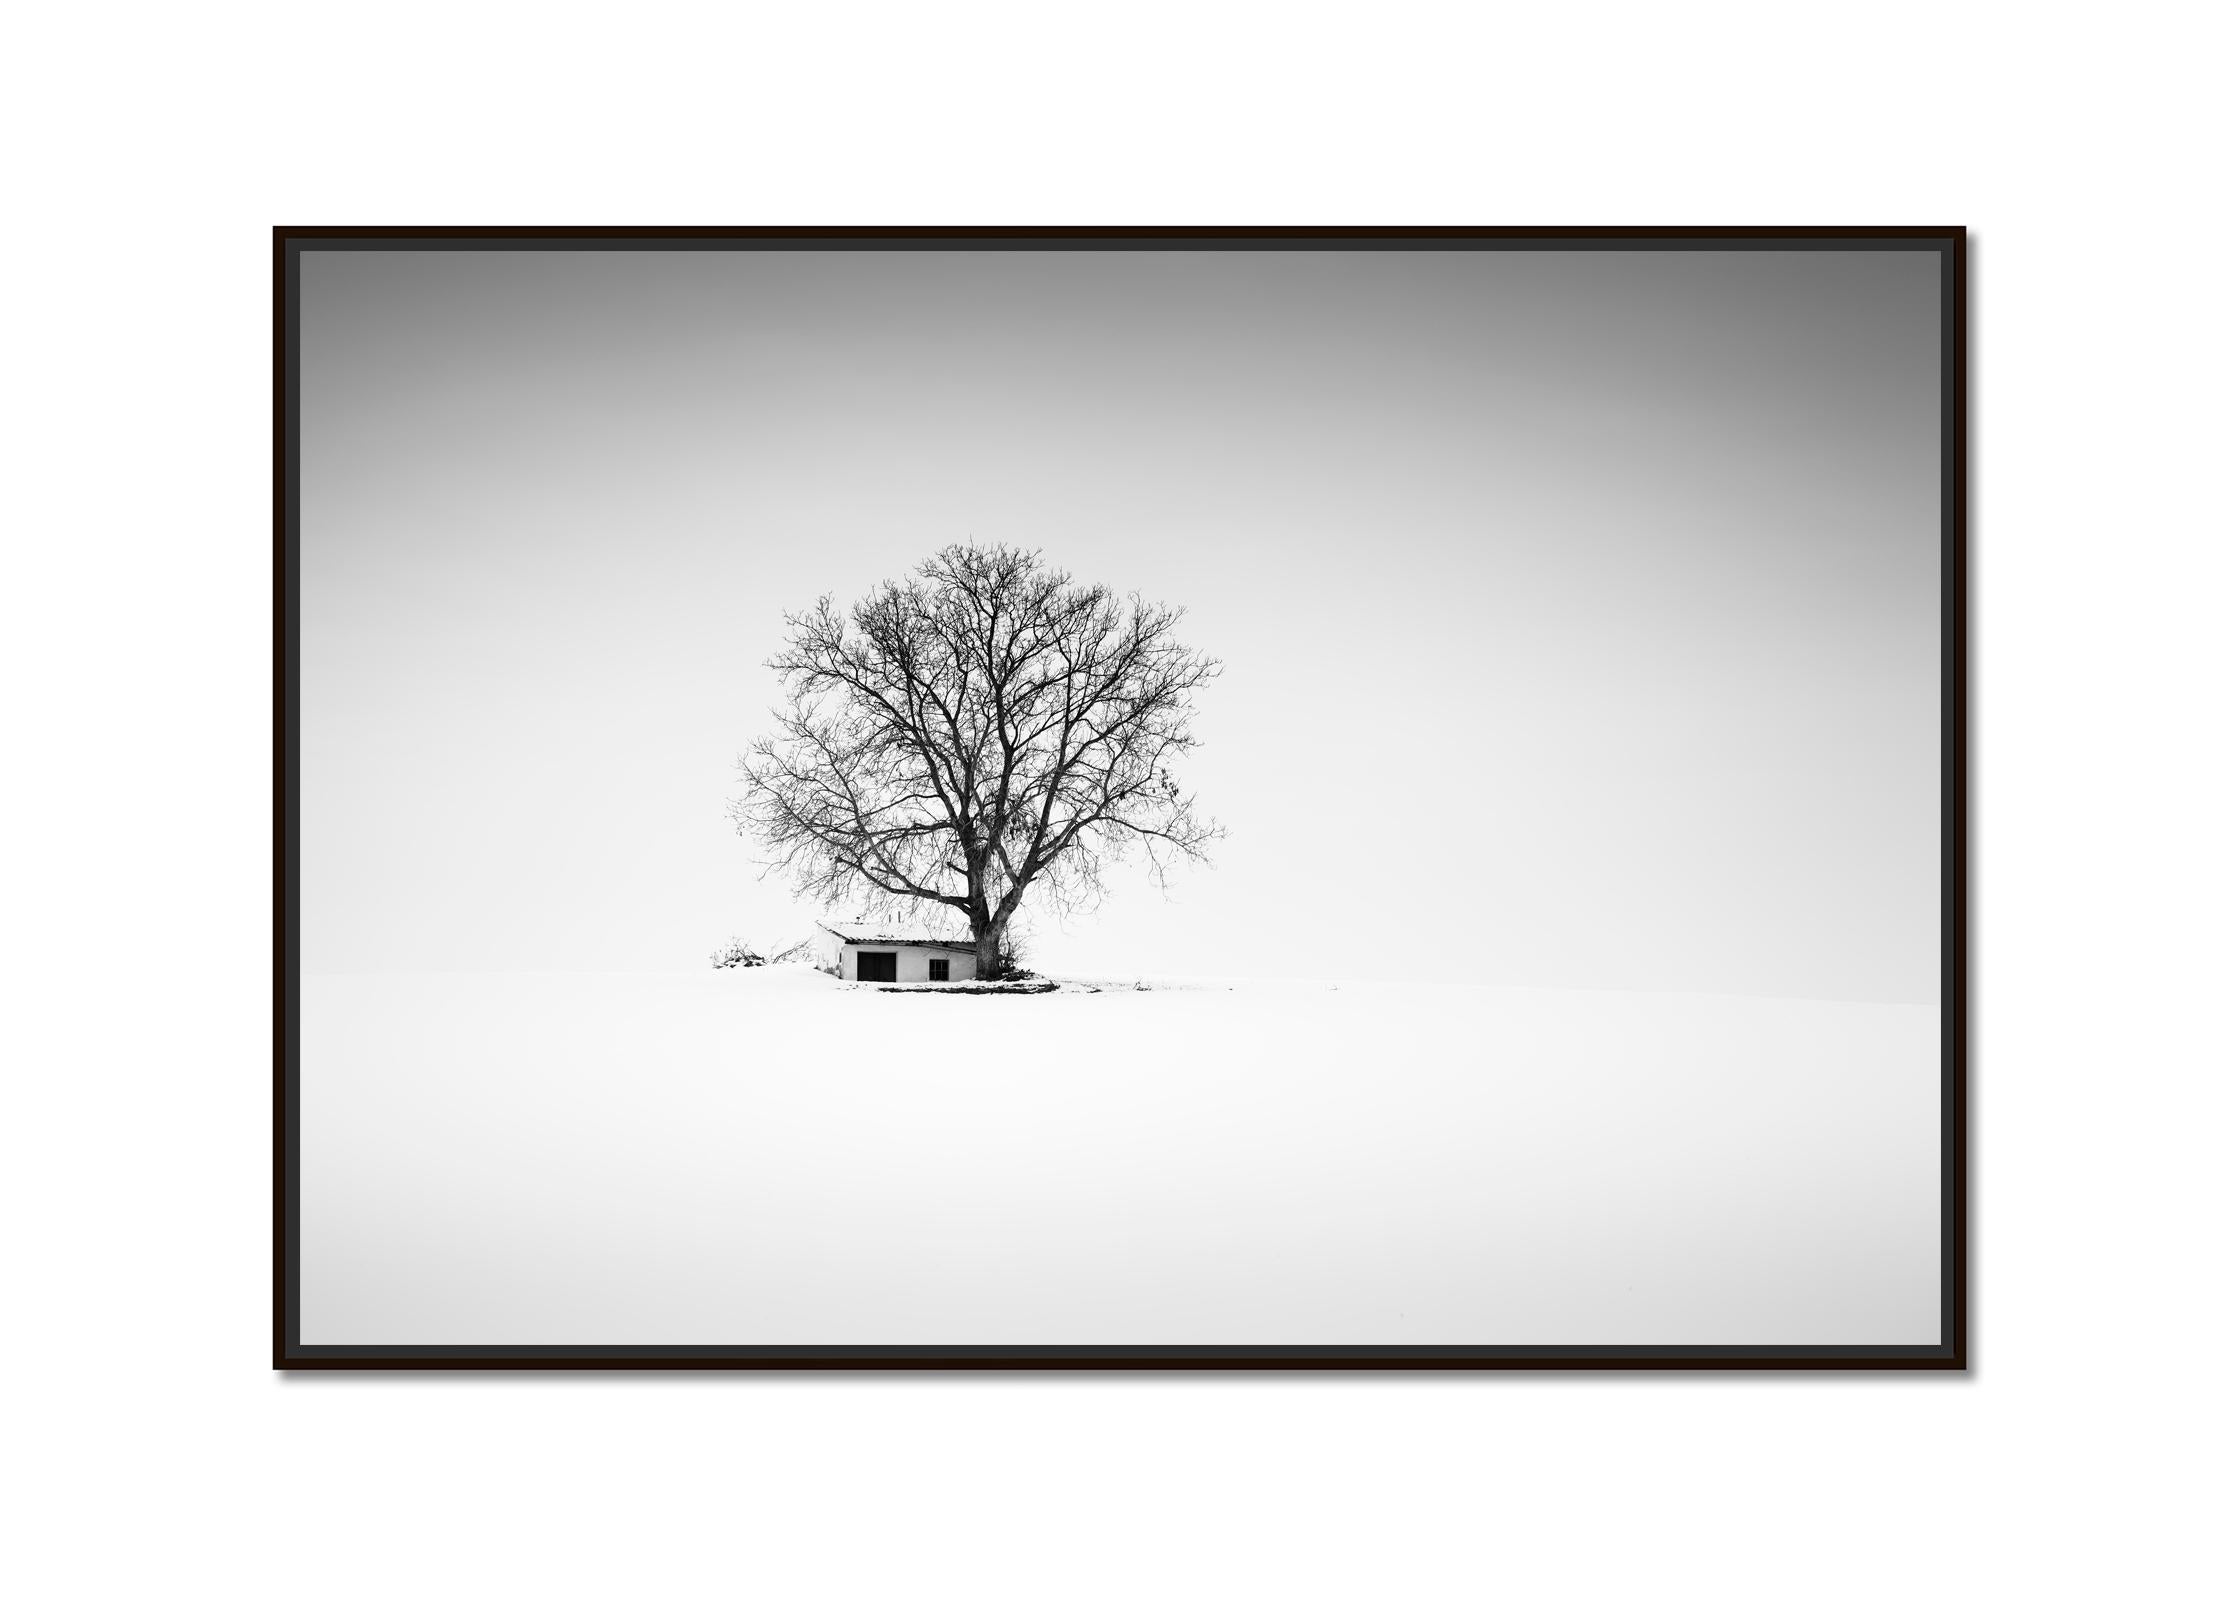 Wine Press House, Austria, Black and white photography panorama winter landscape - Photograph by Gerald Berghammer